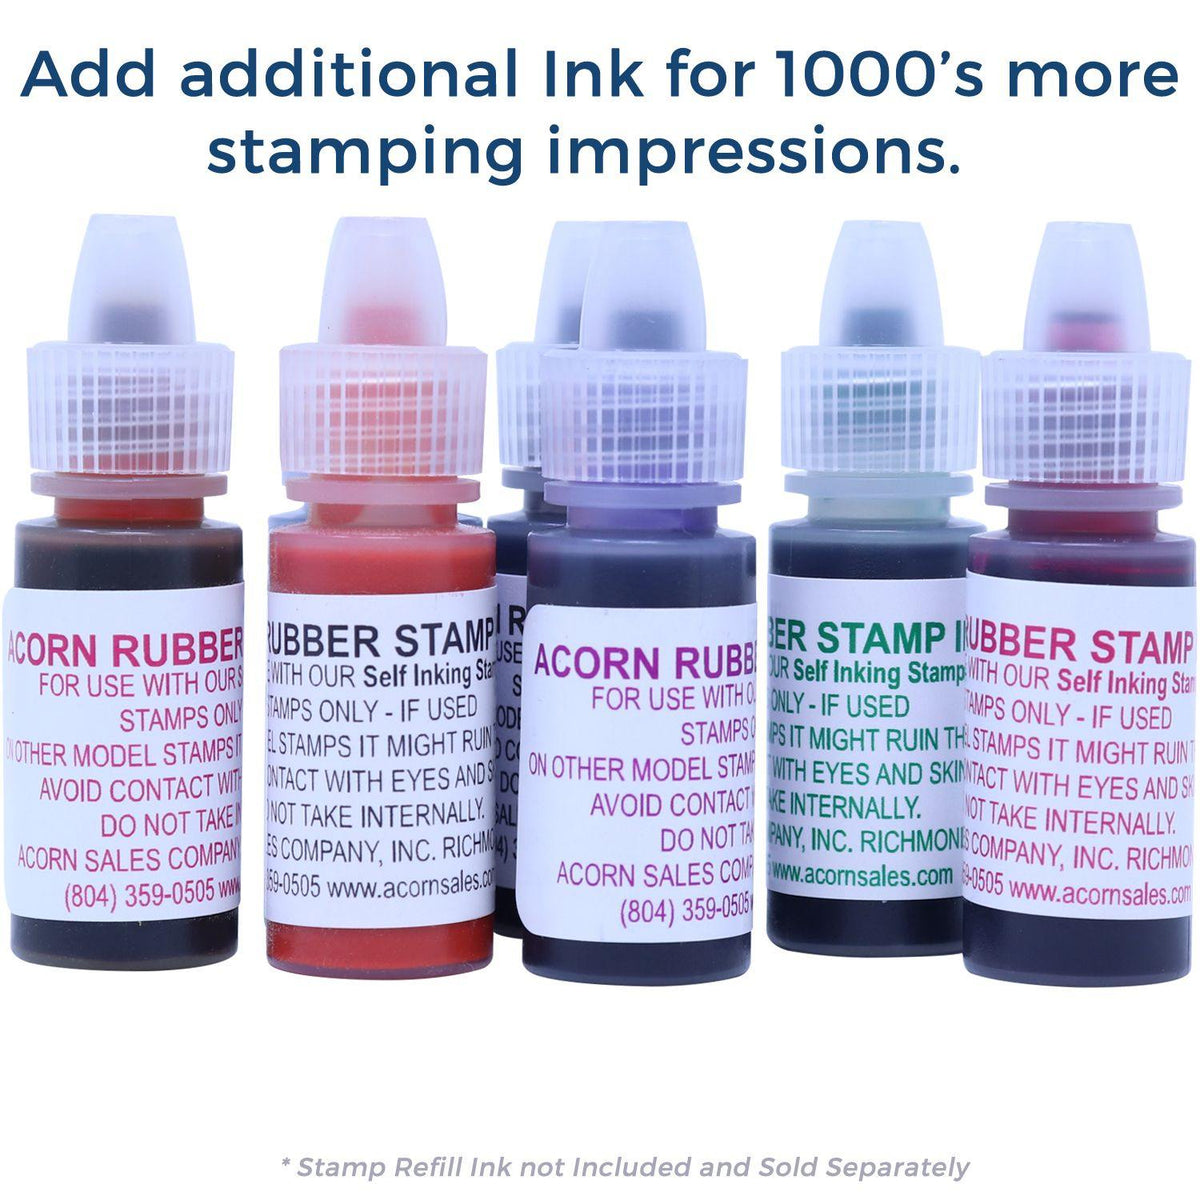 Refill Inks for Large Pre-Inked Bold Shred Stamp Available